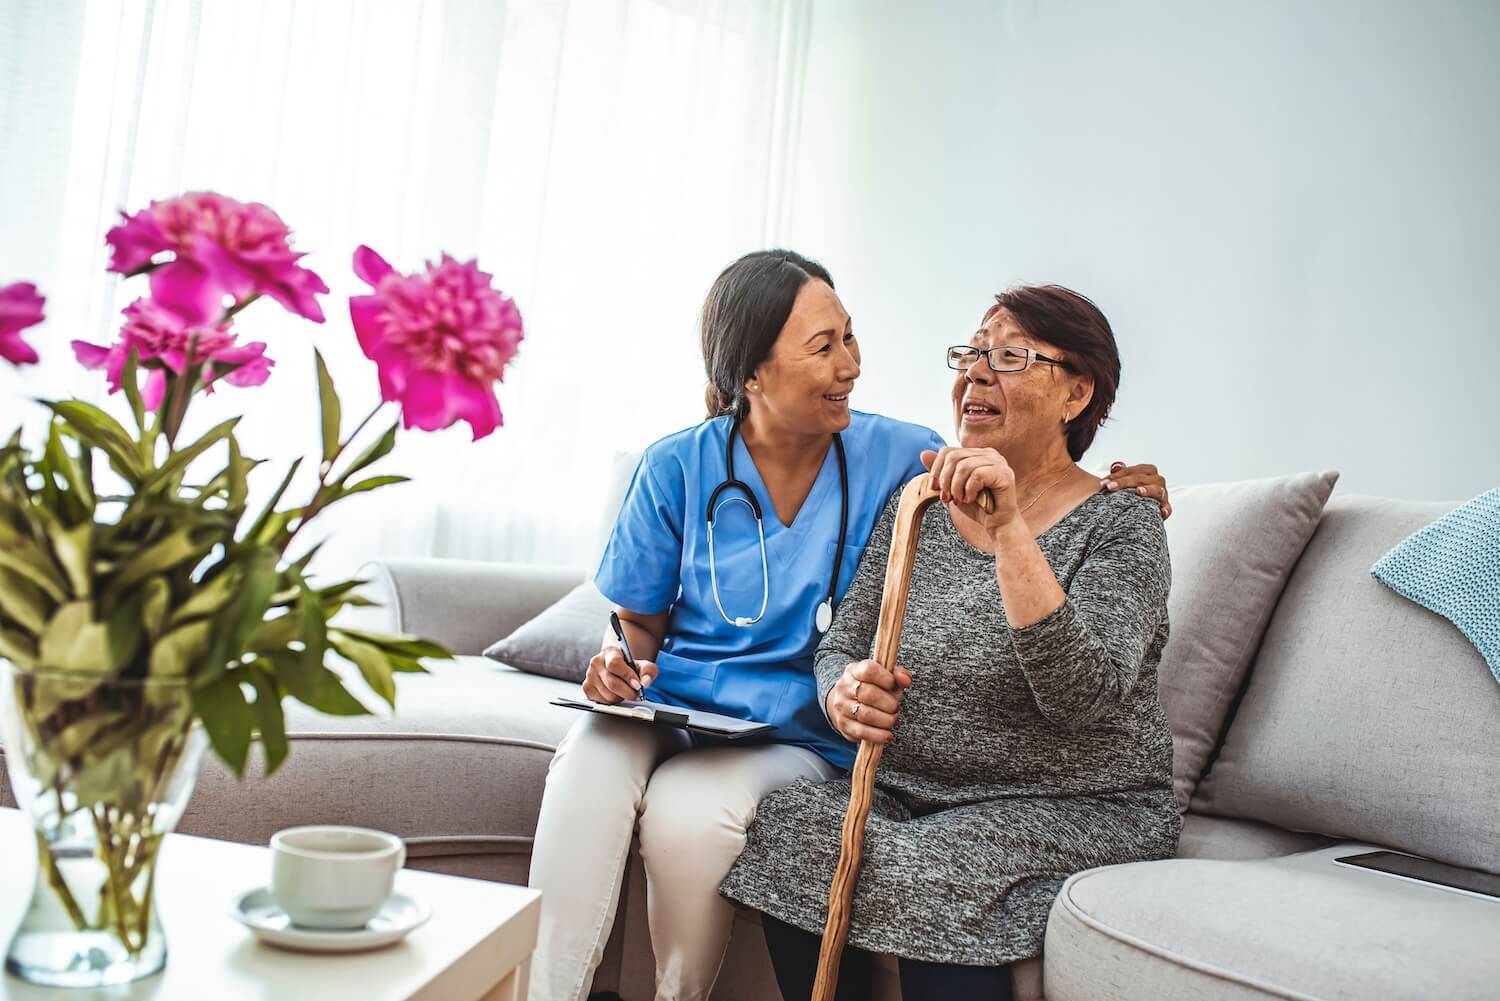 Female medical professional and senior woman with a cane sitting next to each other on a couch